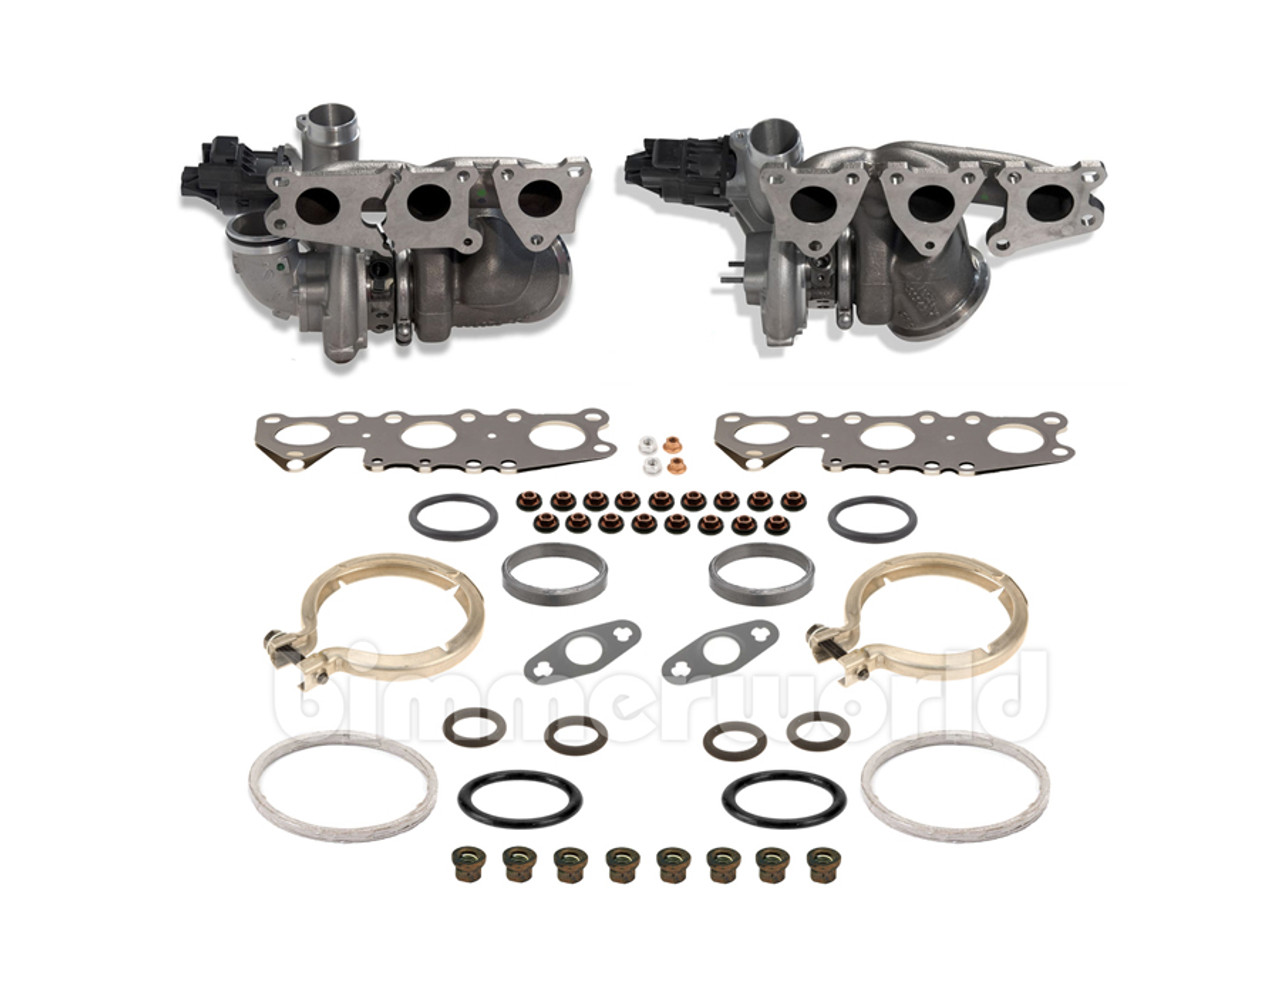 OEM Turbo Replacement Kit - M2 M3 M4 F80 F82 F83 F87 - Reuse Oil Pipes